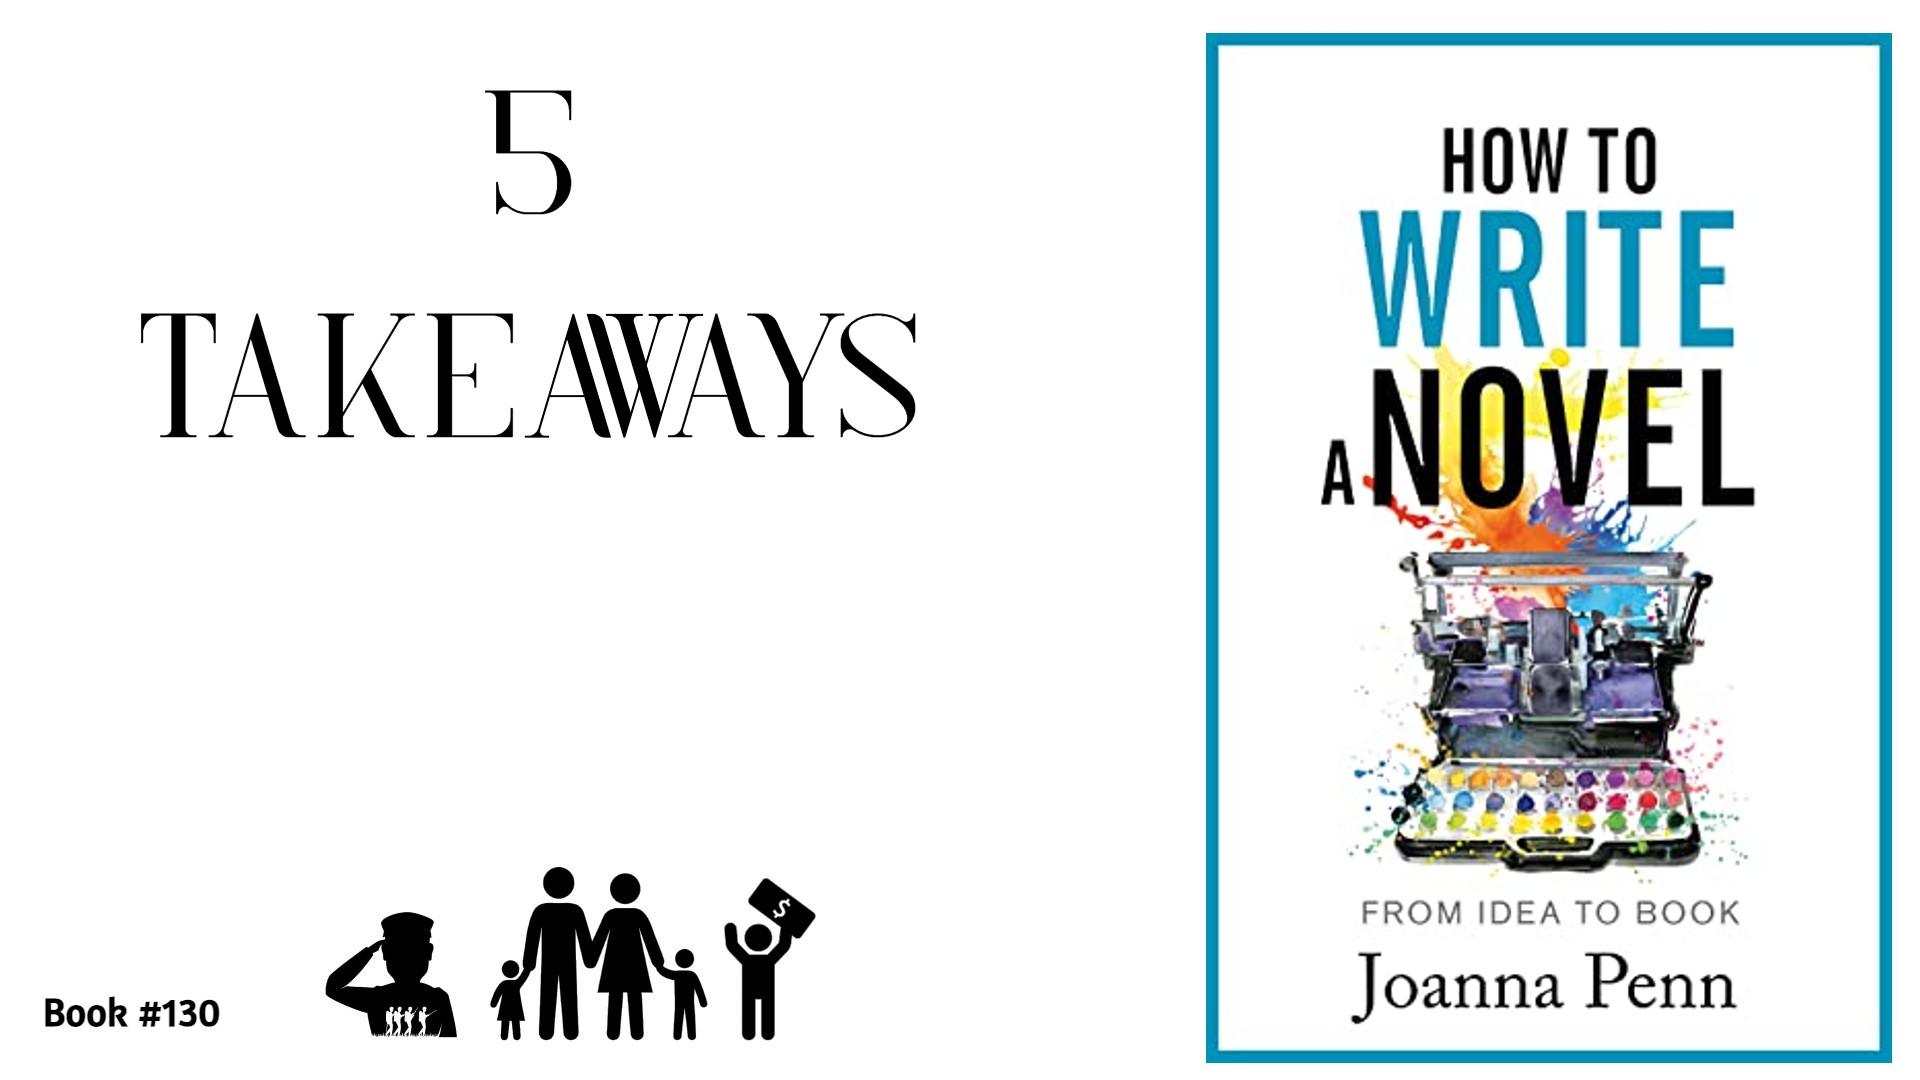 5 Takeaways from “How to Write a Novel”